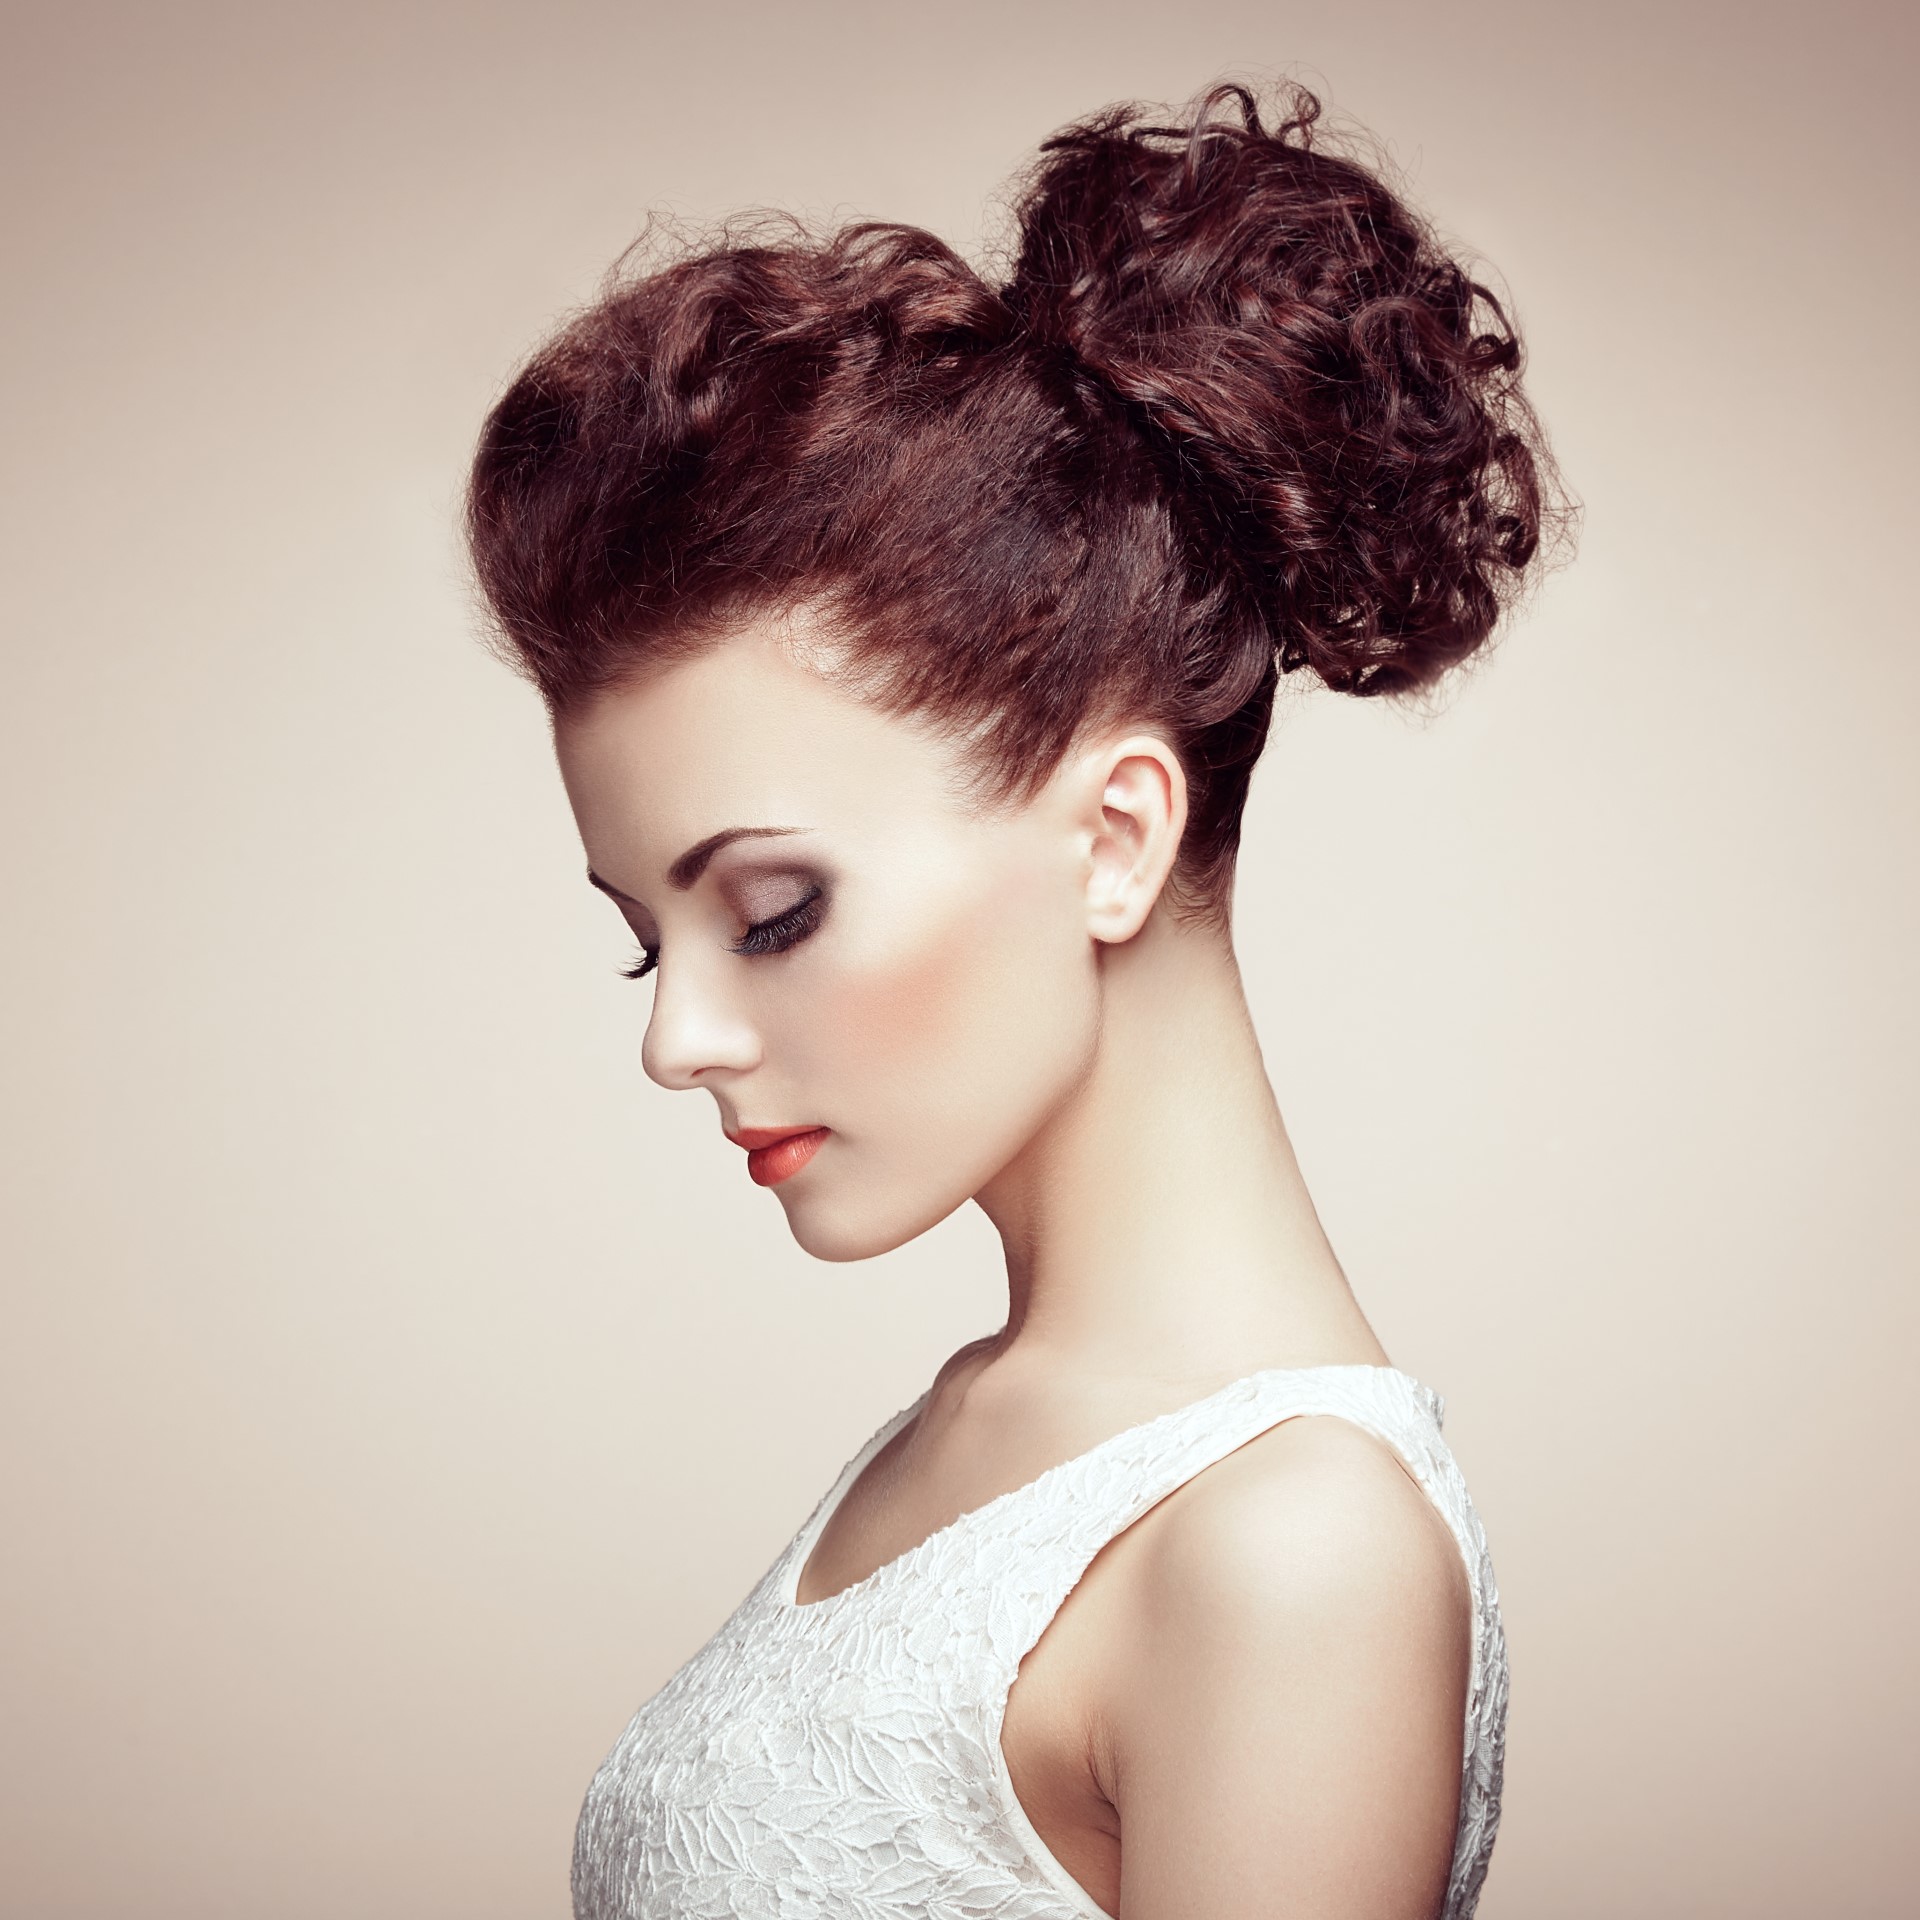 Portrait Of Beautiful Sensual Woman With Elegant Hairstyle.  Per